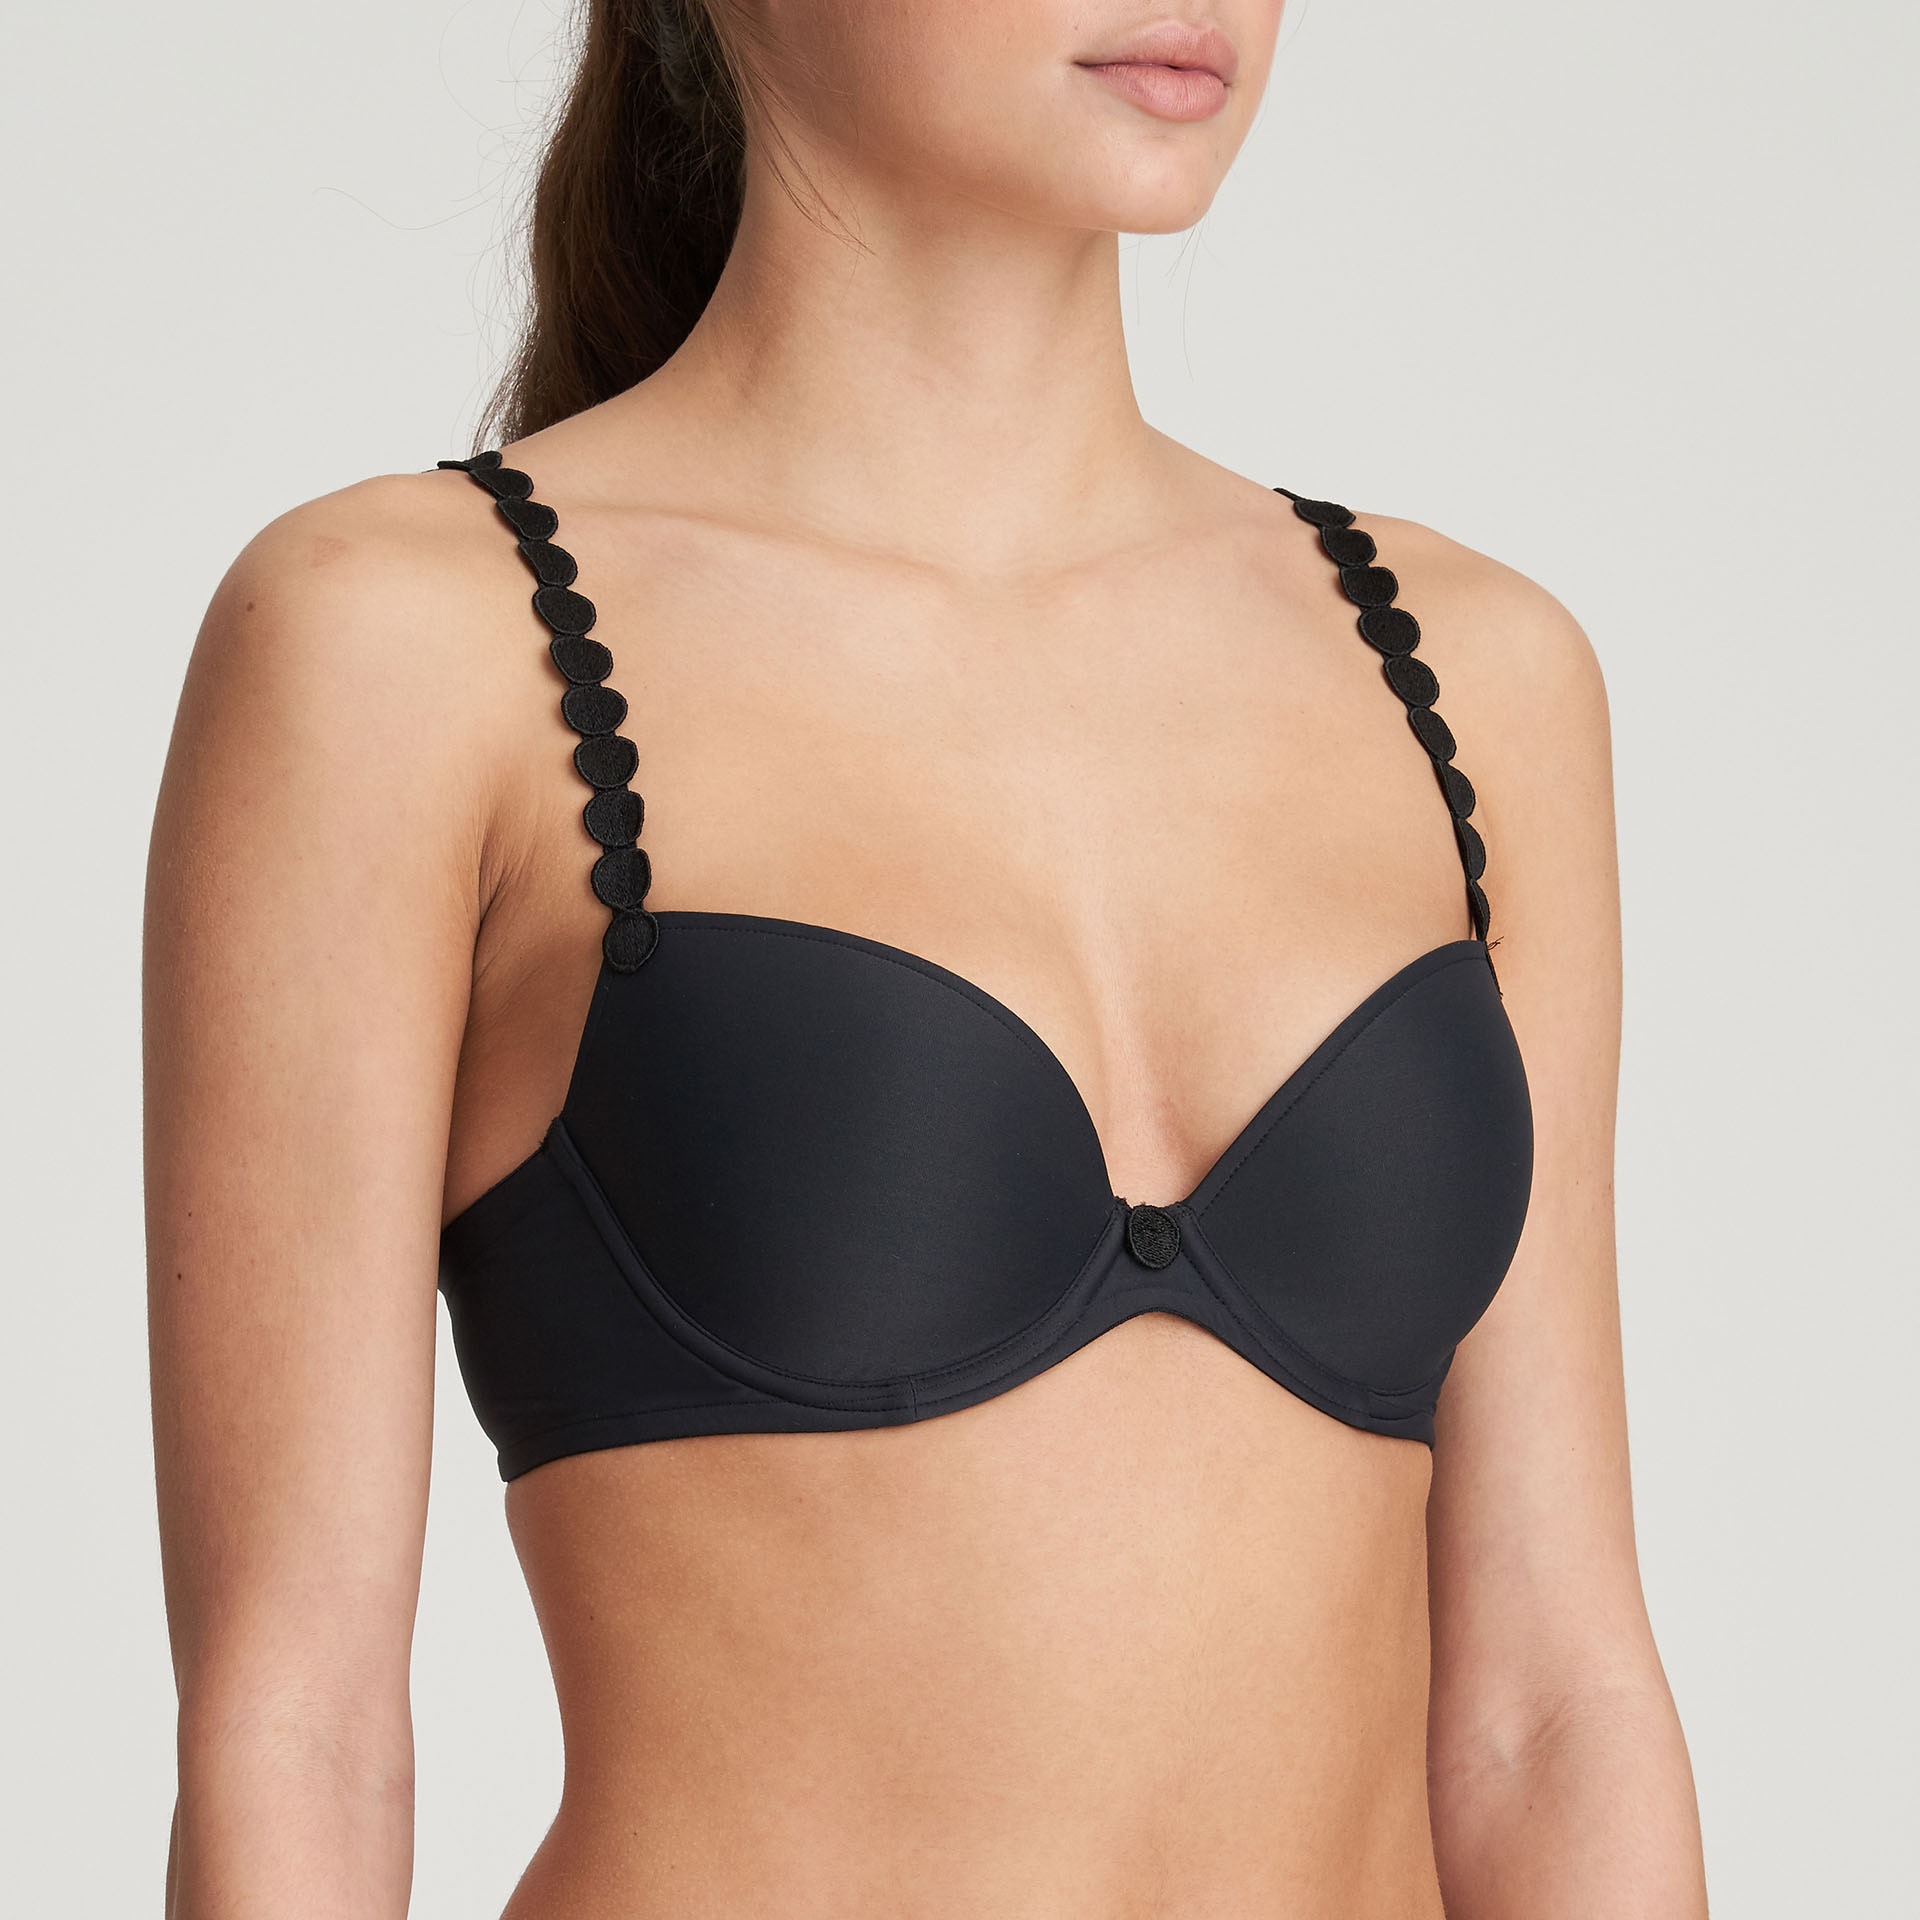 Tom Vadderad Bh  Plunge Charcoal